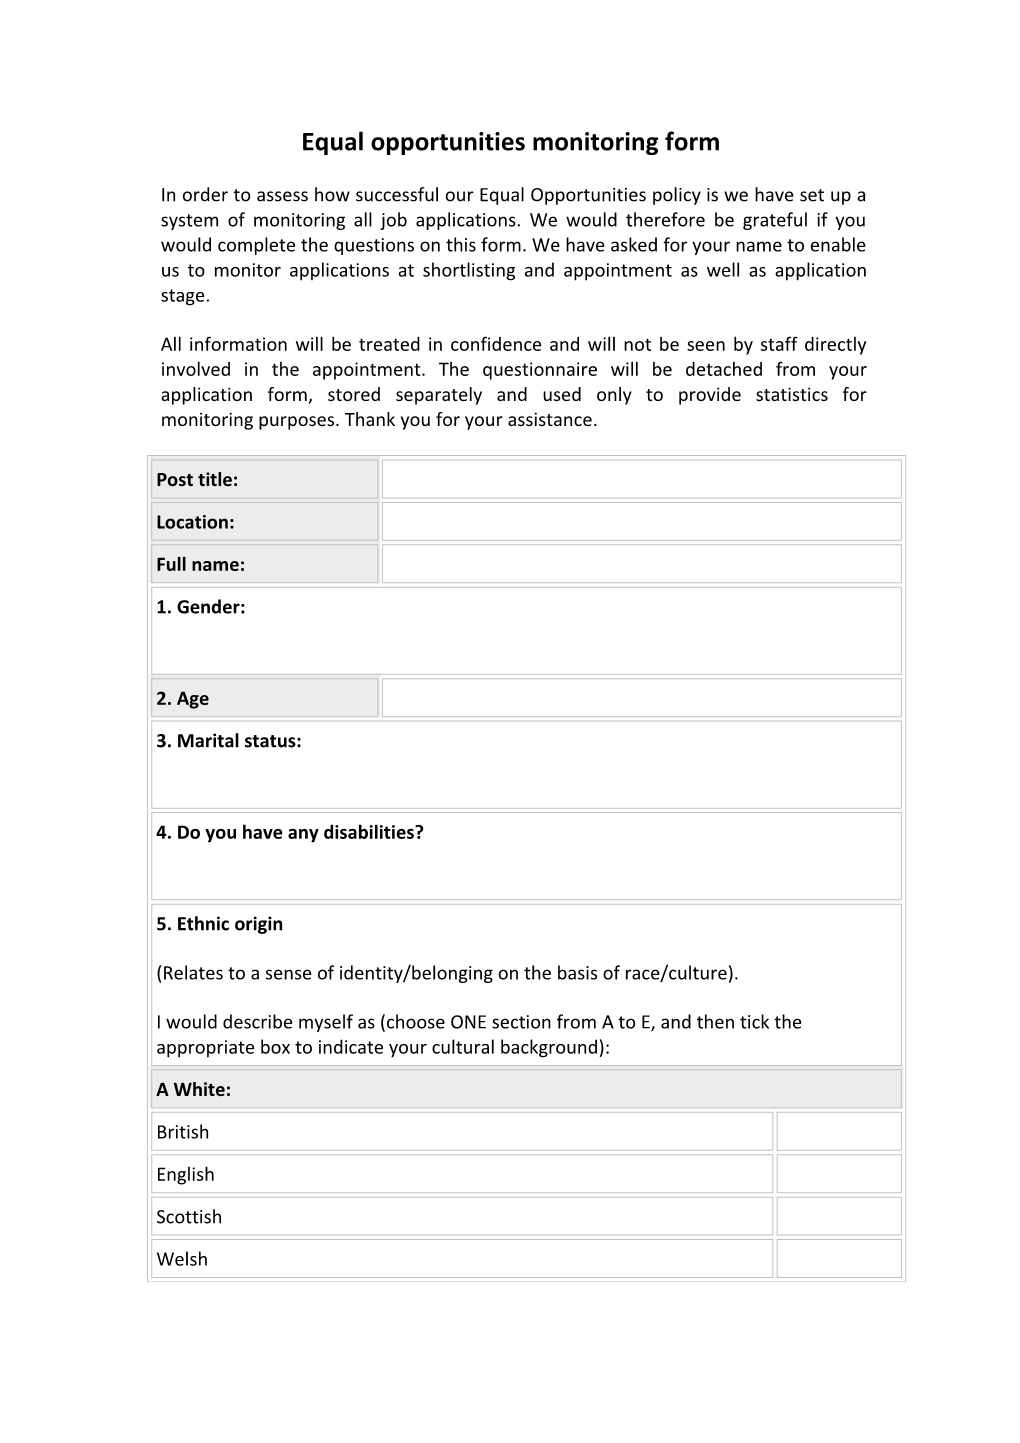 Equal Opportunities Monitoring Form s3